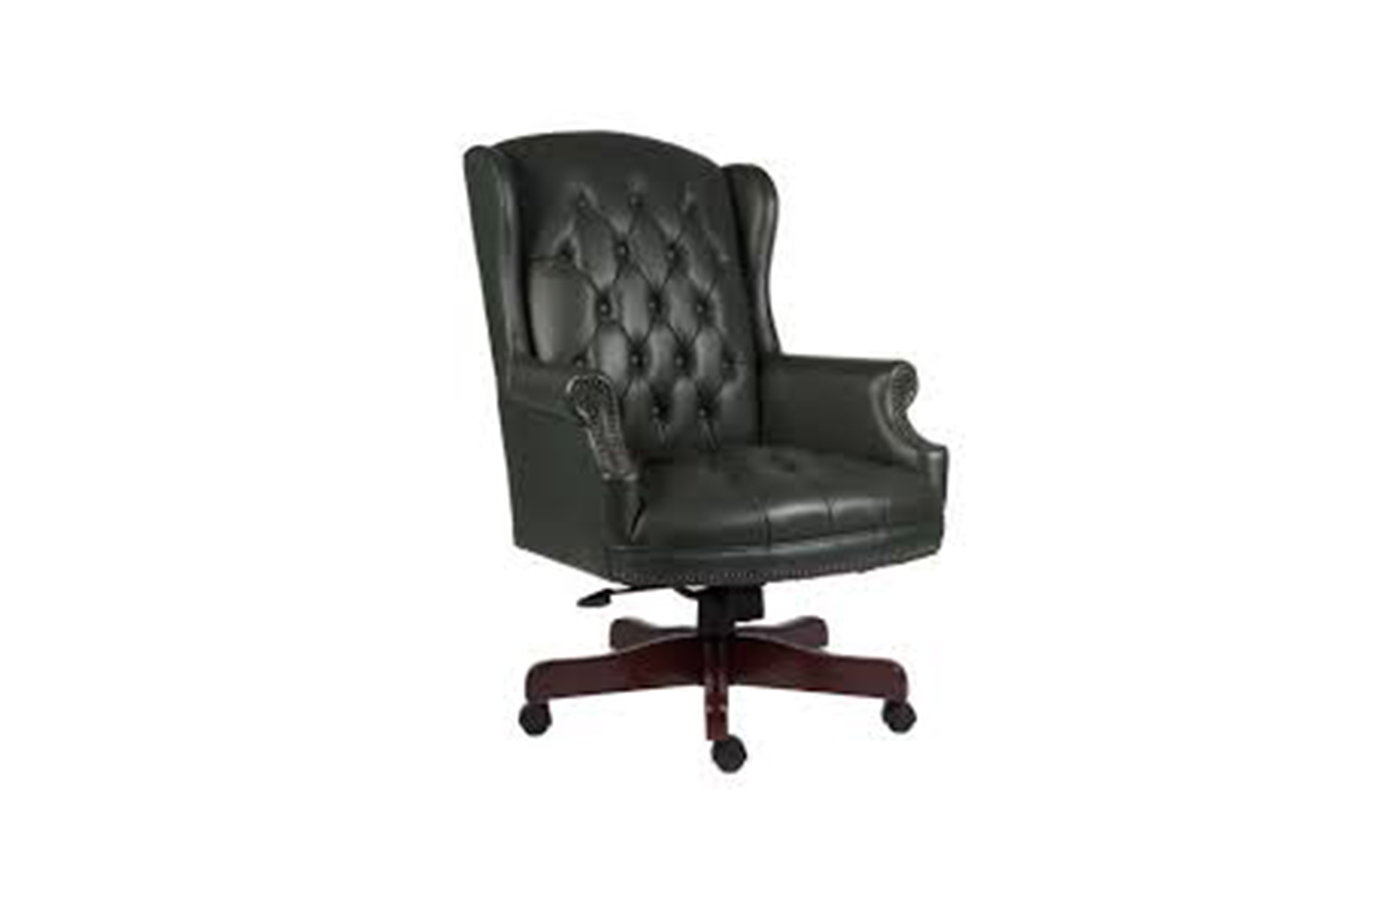 Bahrain Office Chair - The Chesterfield Manufacturer